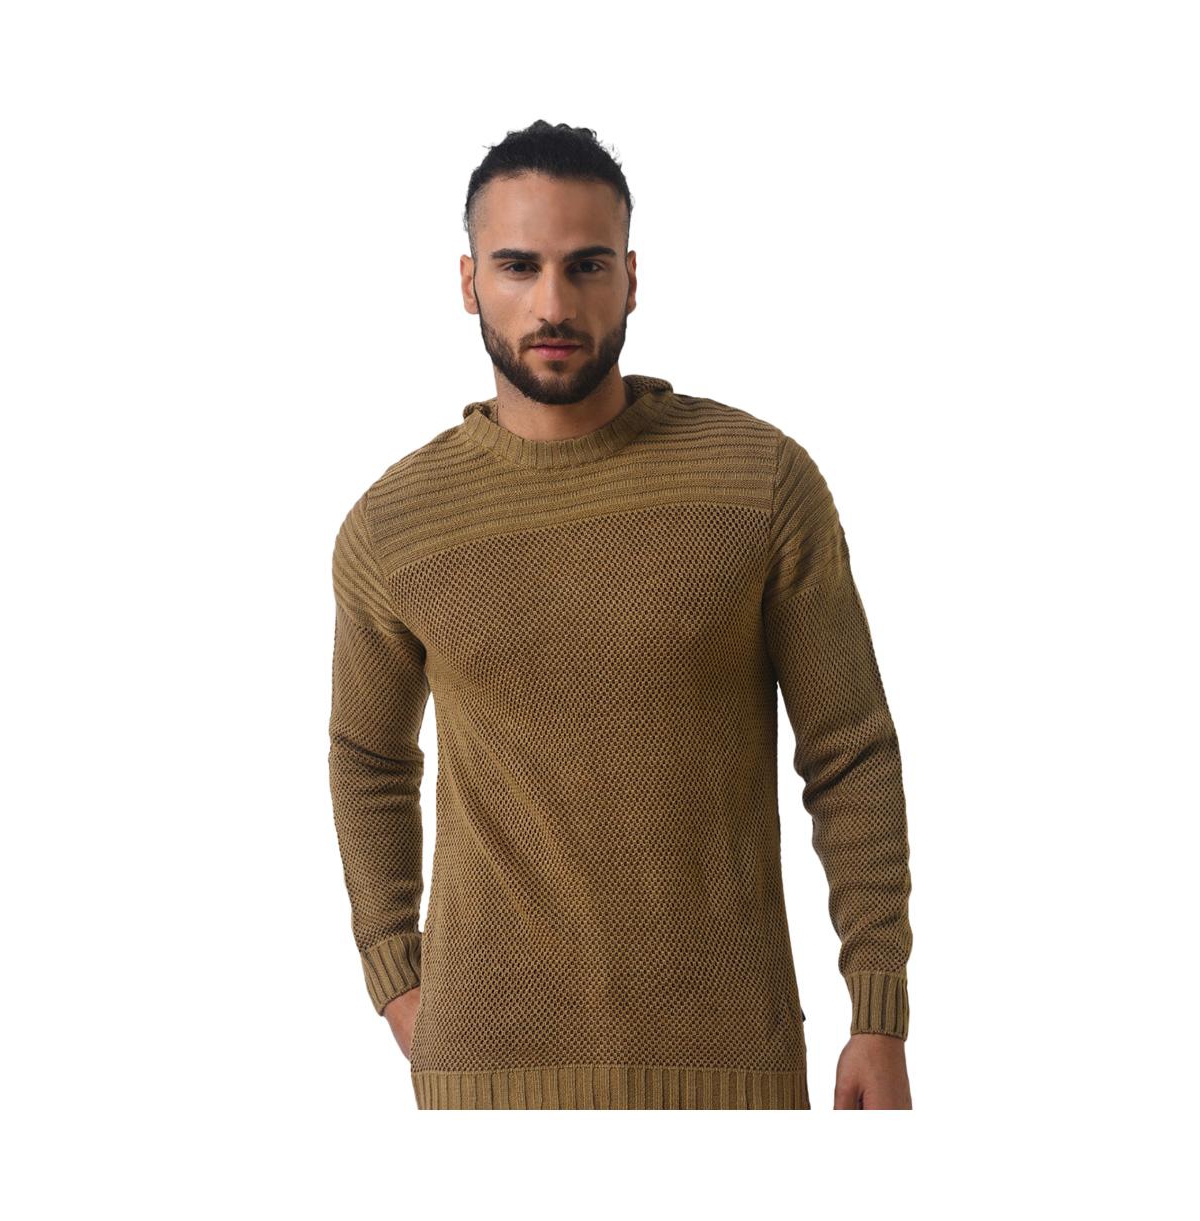 Campus Sutra Men's Brown Textured Knit Pullover Sweater